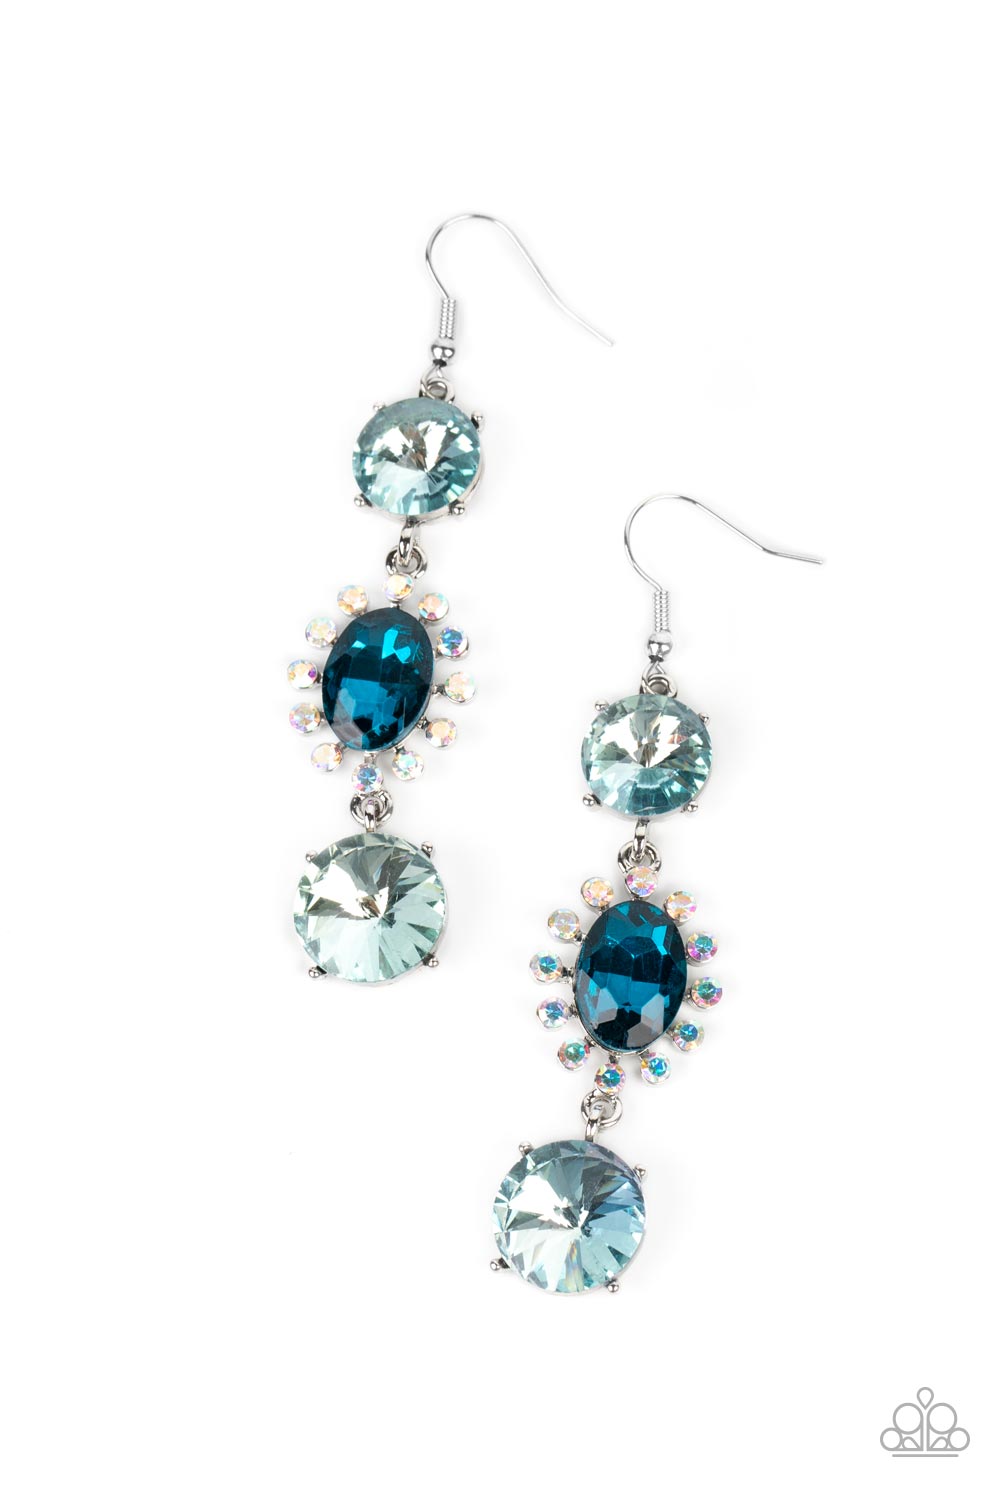 Paparazzi Magical Melodrama Earrings. Subscribe & Save. #P5ST-BLXX-045XX. Blue Iridescent $5